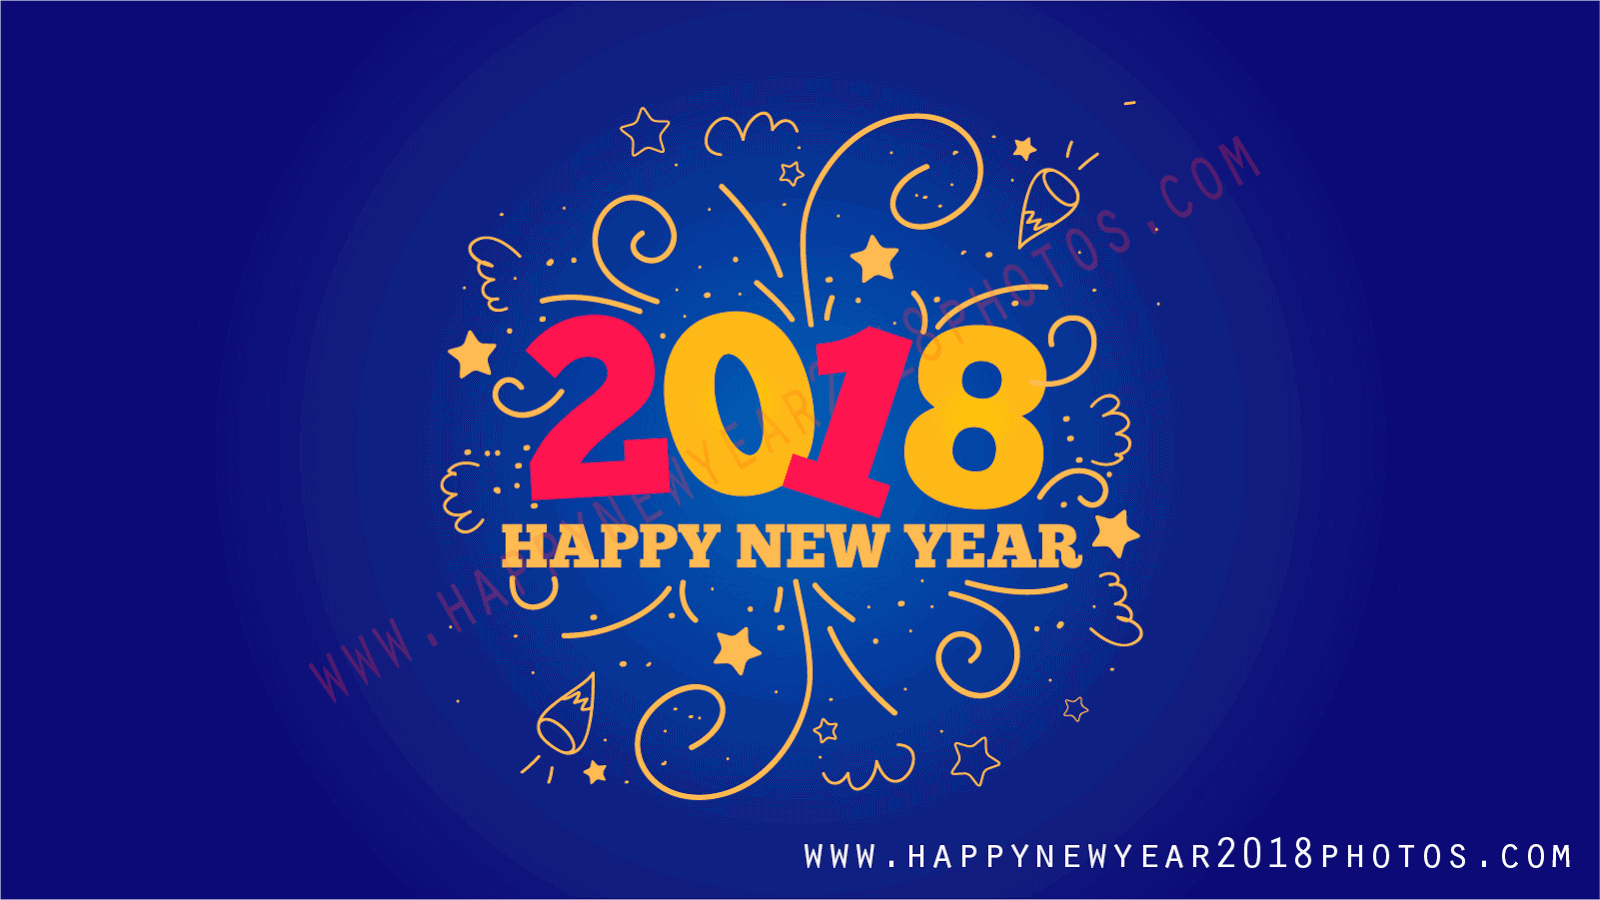 New Year 2018 Cards Wishes Image Picture Photo Wallpaper Greetings 02